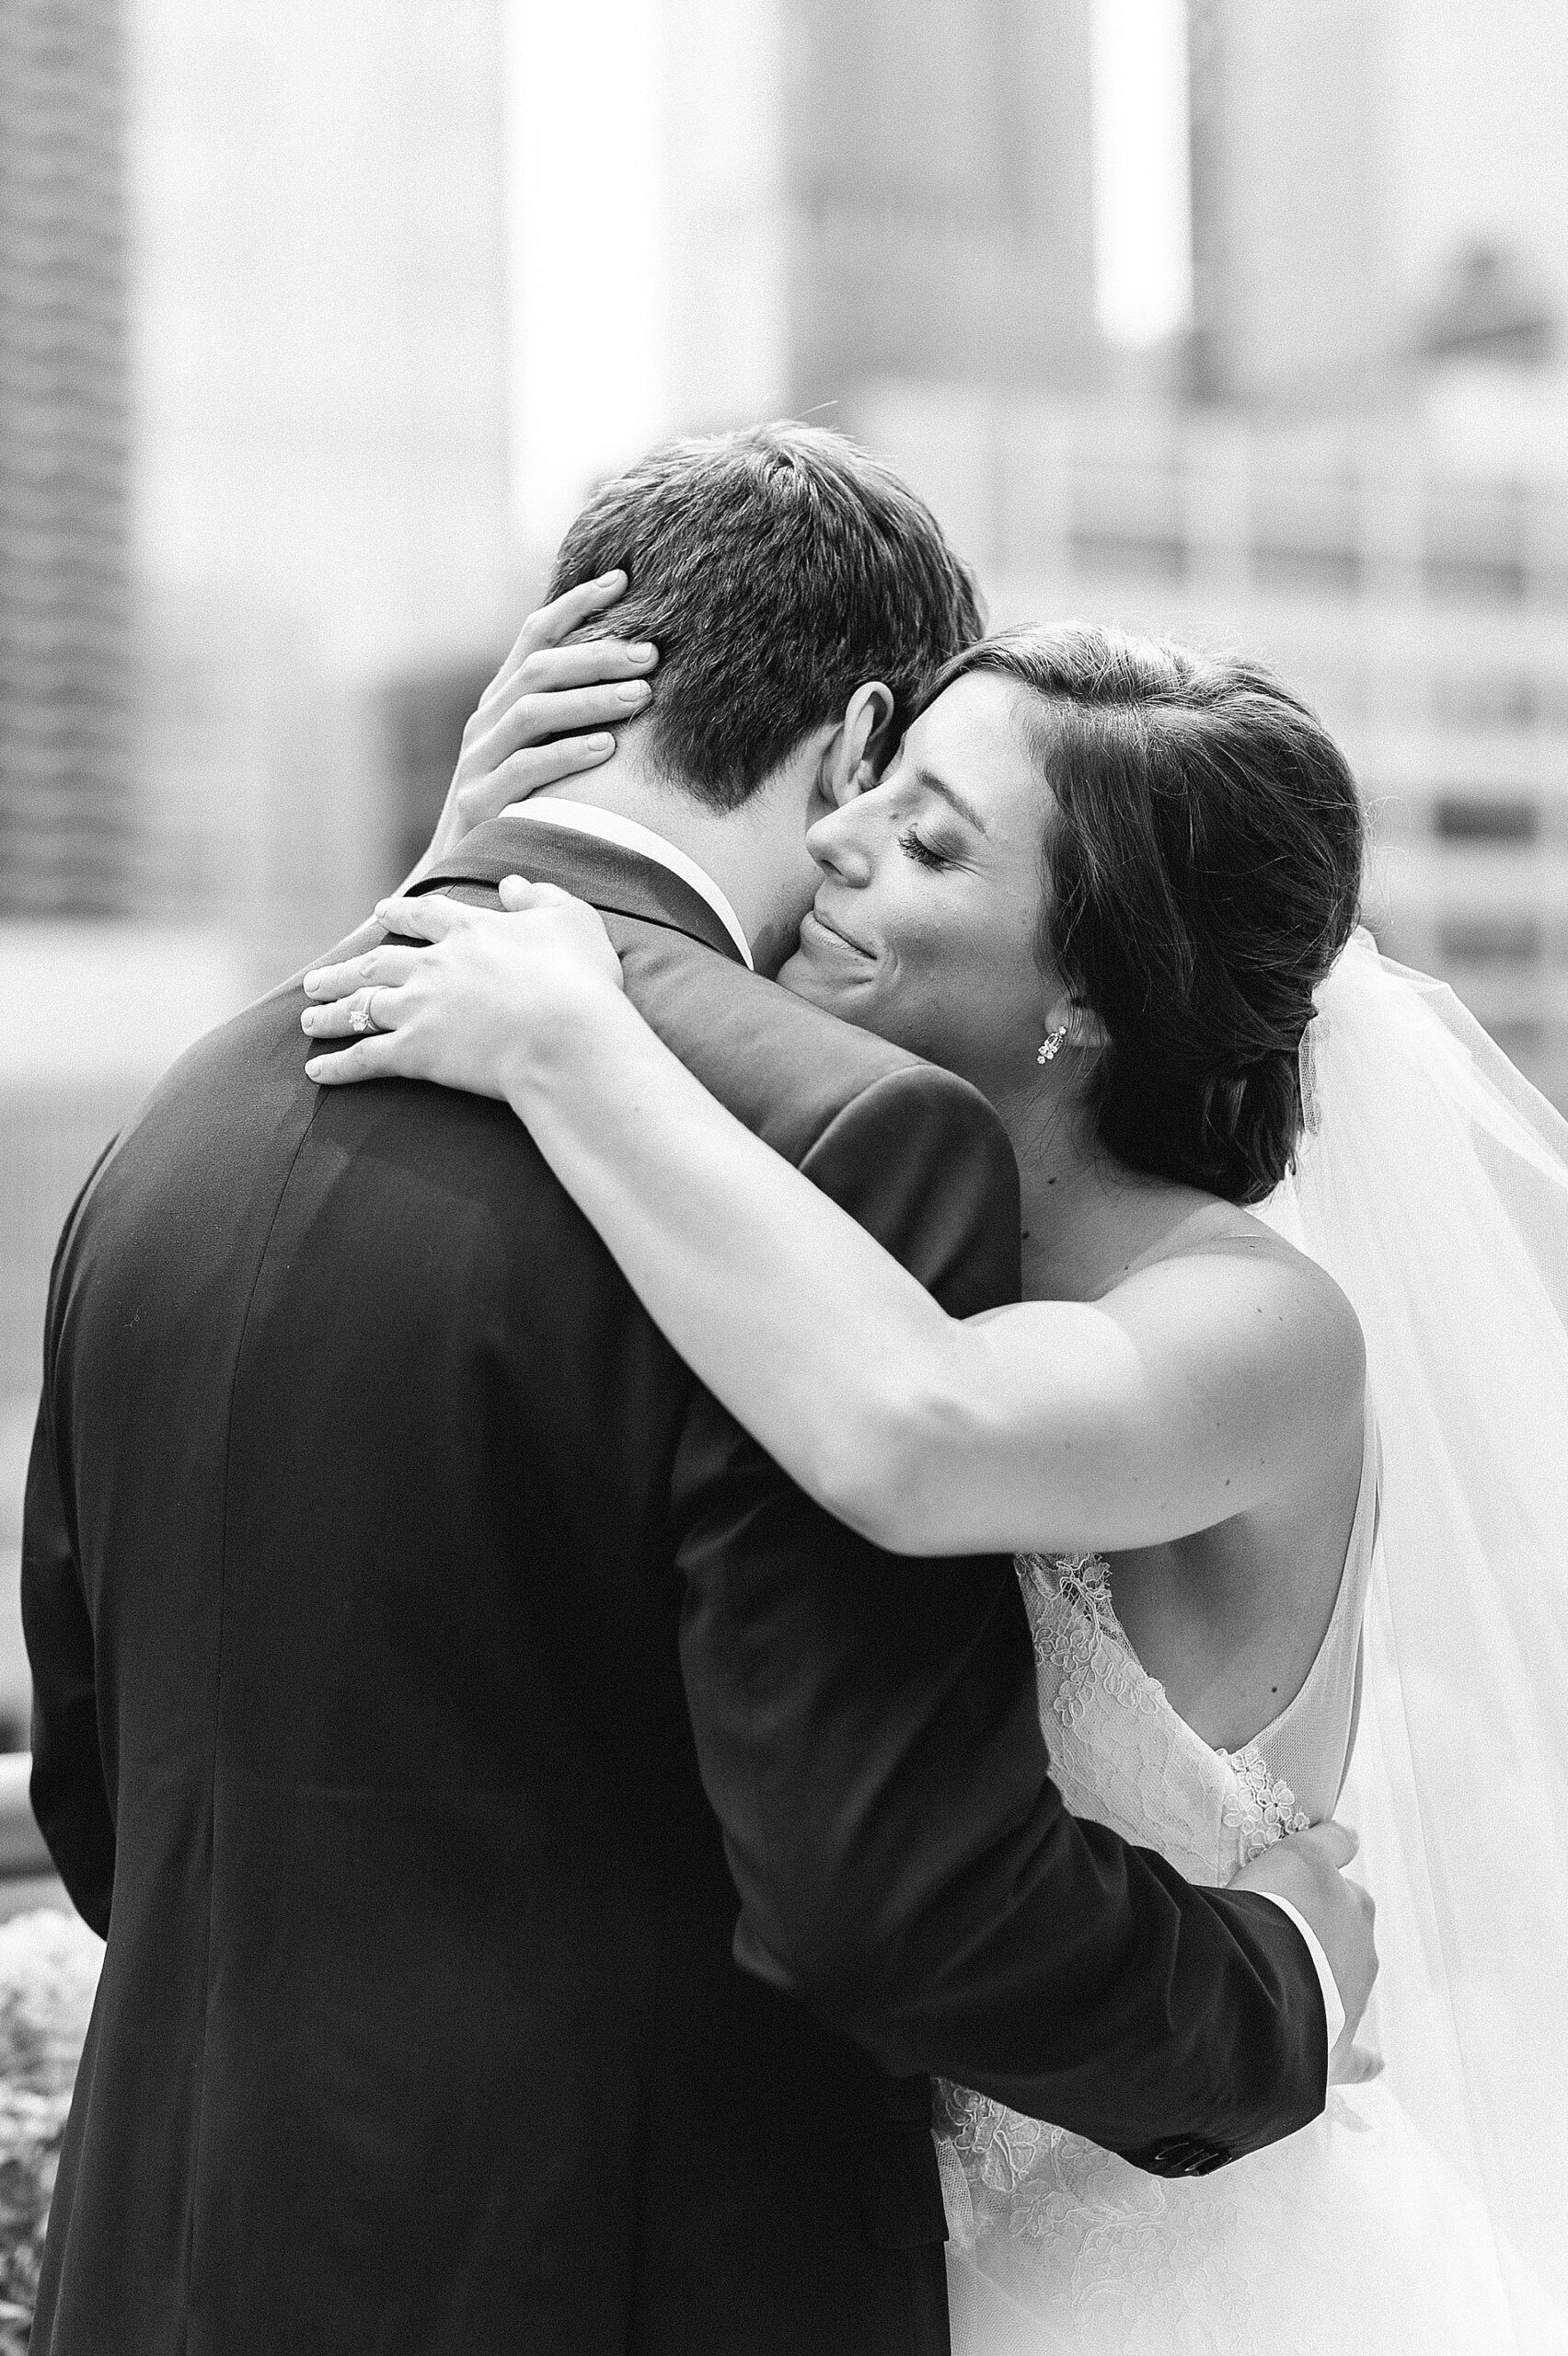 Romantic wedding portraits | Make the most of your wedding photos